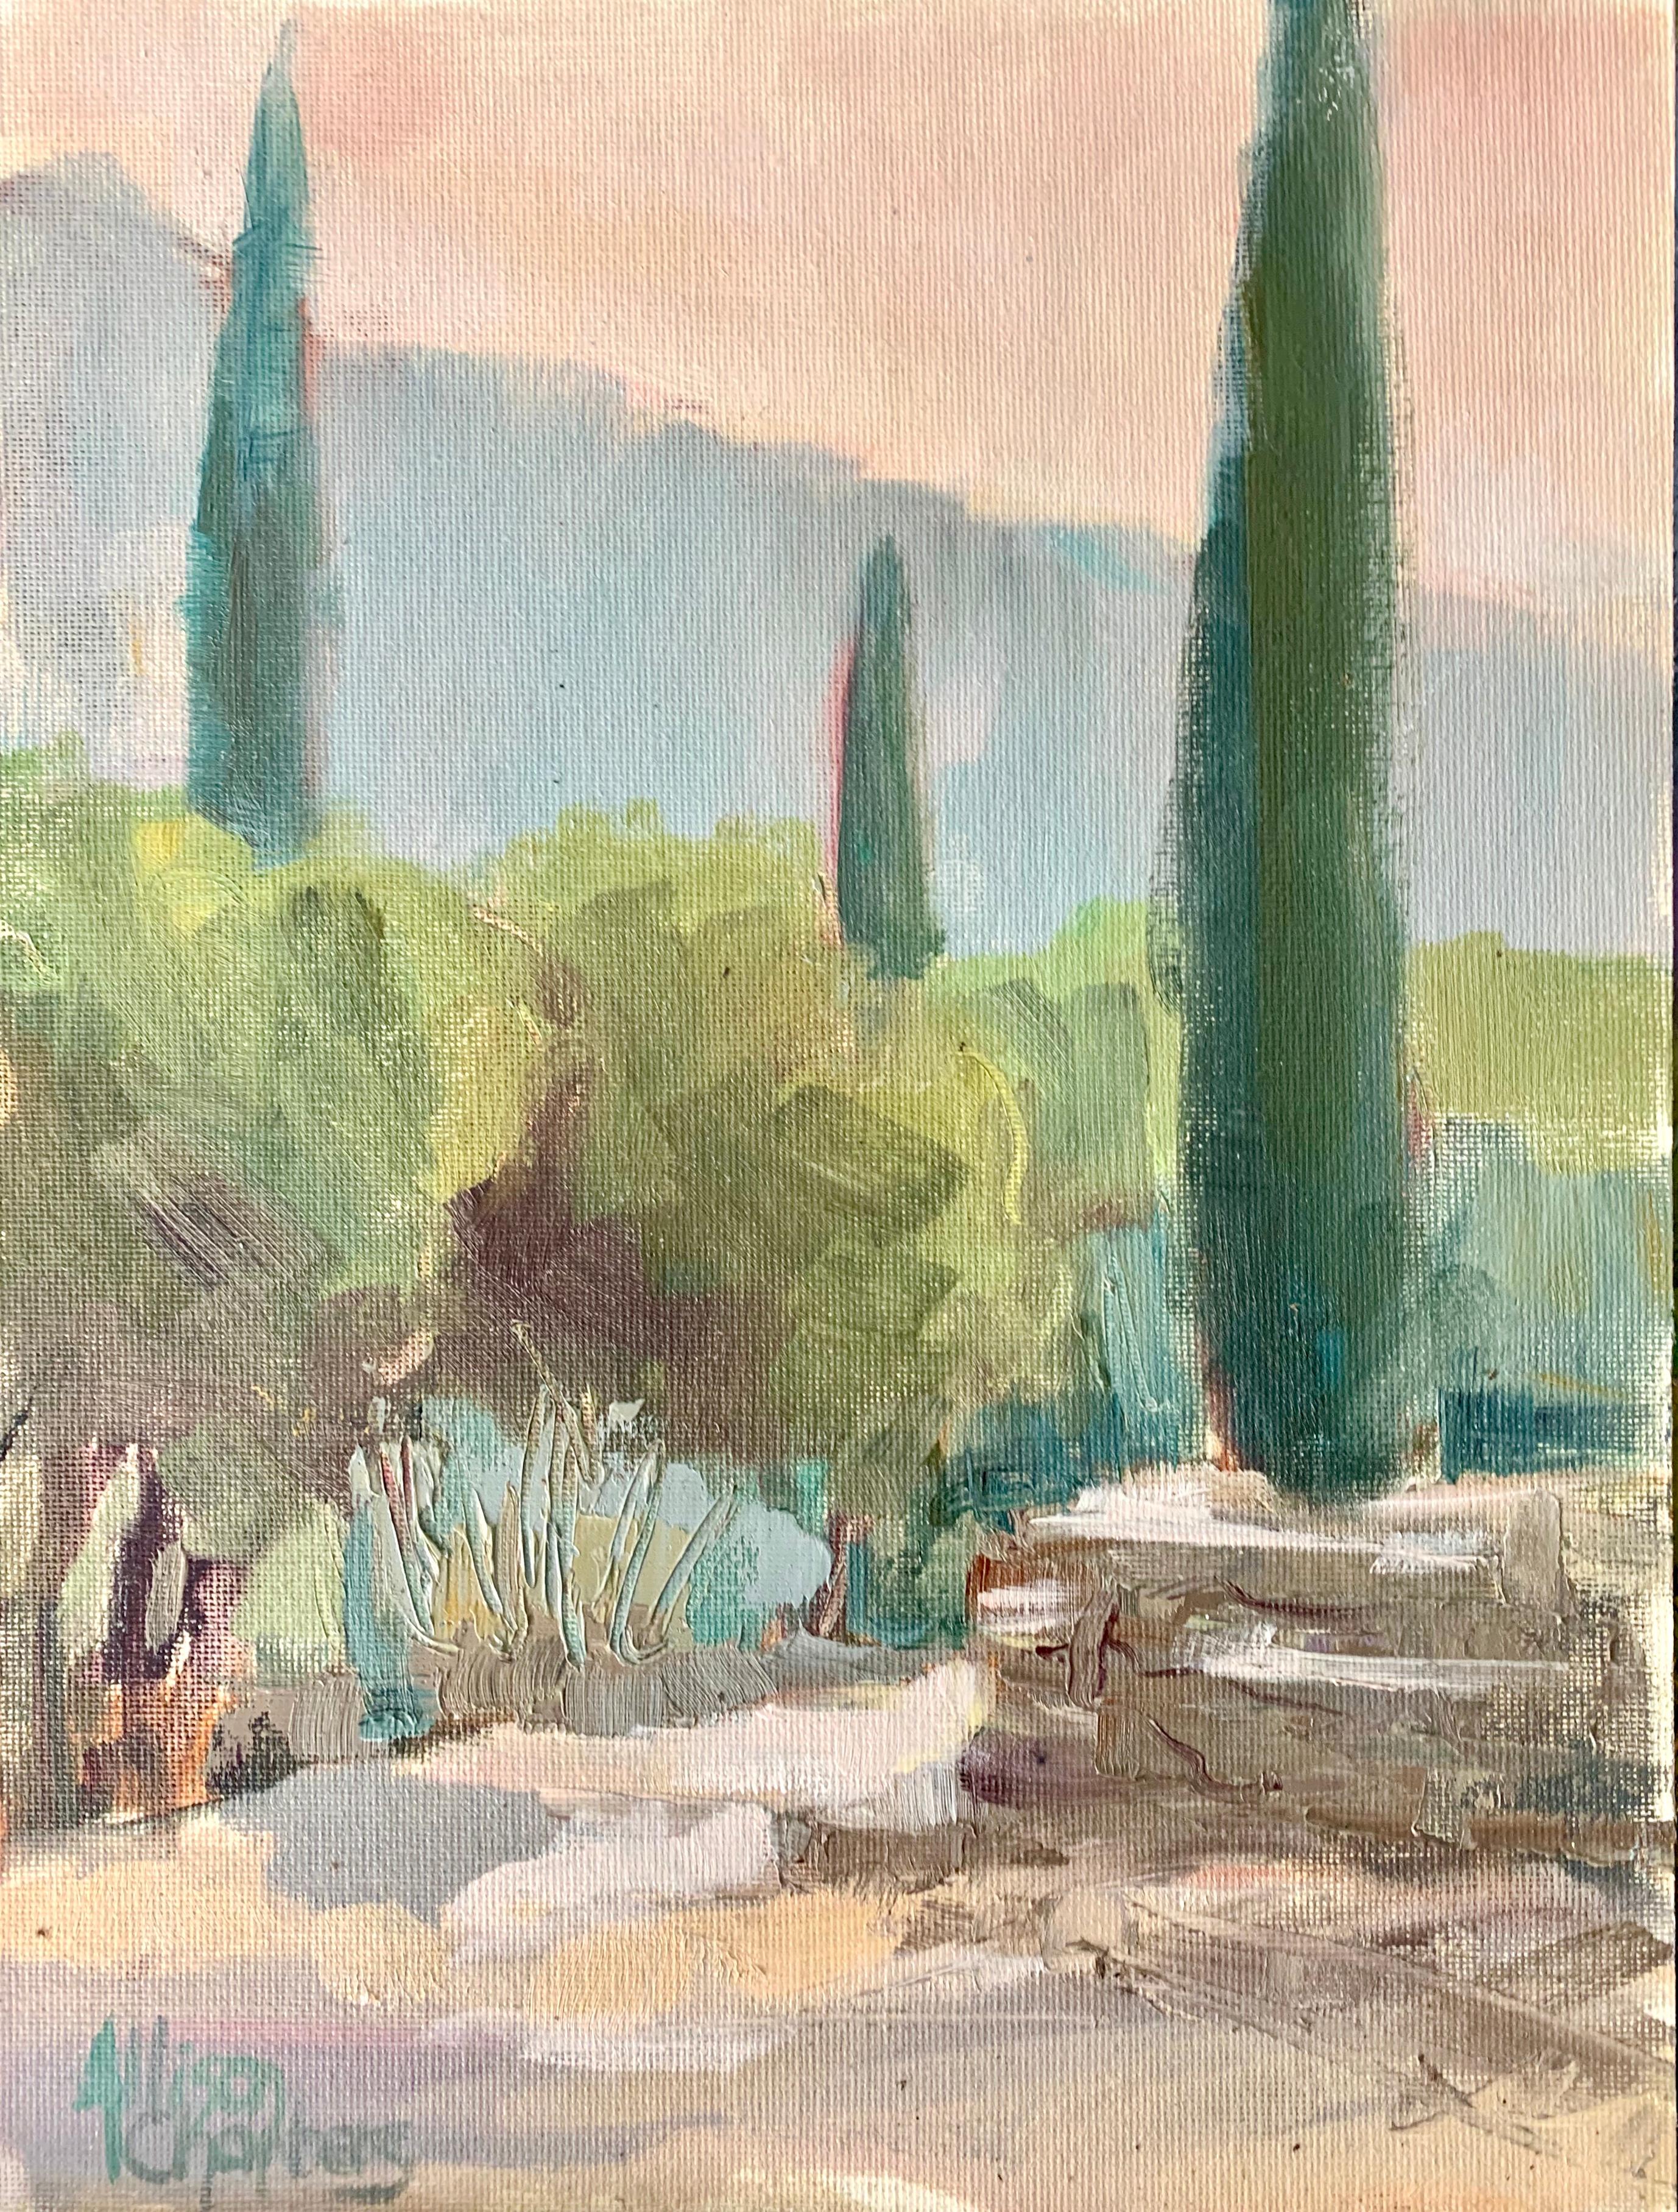 Allison’s work came across our radar a while ago but a recent painting trip to Provence with her sealed the deal as we watched her paint diligently and with a keen eye that missed no detail.

We’re drawn to Allison’s softly rendered and beautifully